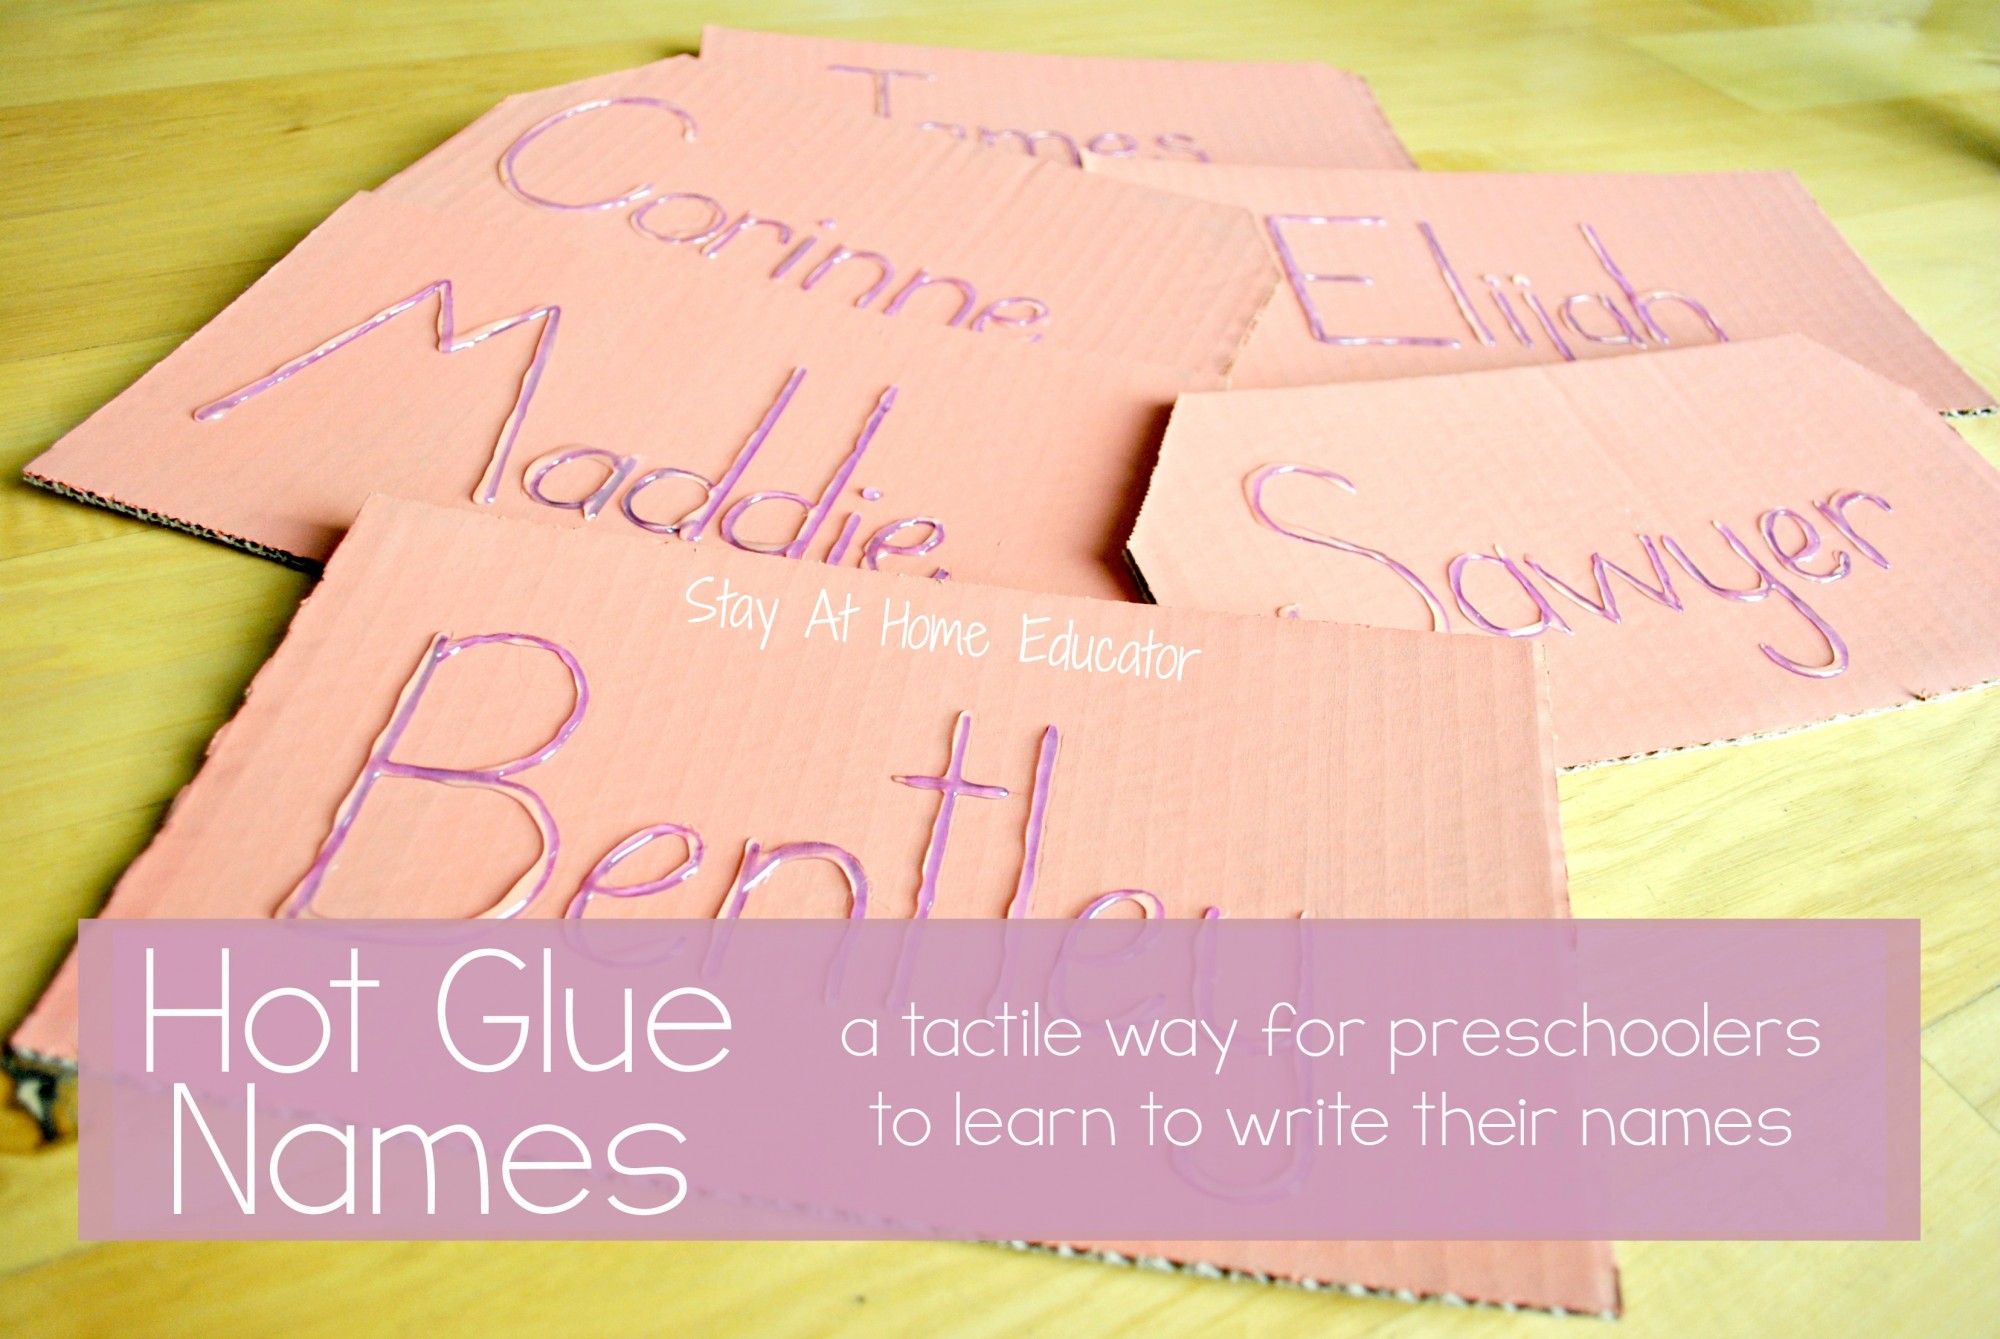 Hot glue name cards are a tactile way for preschoolers to learn how to recognize and write their names - Stay At Home Educator